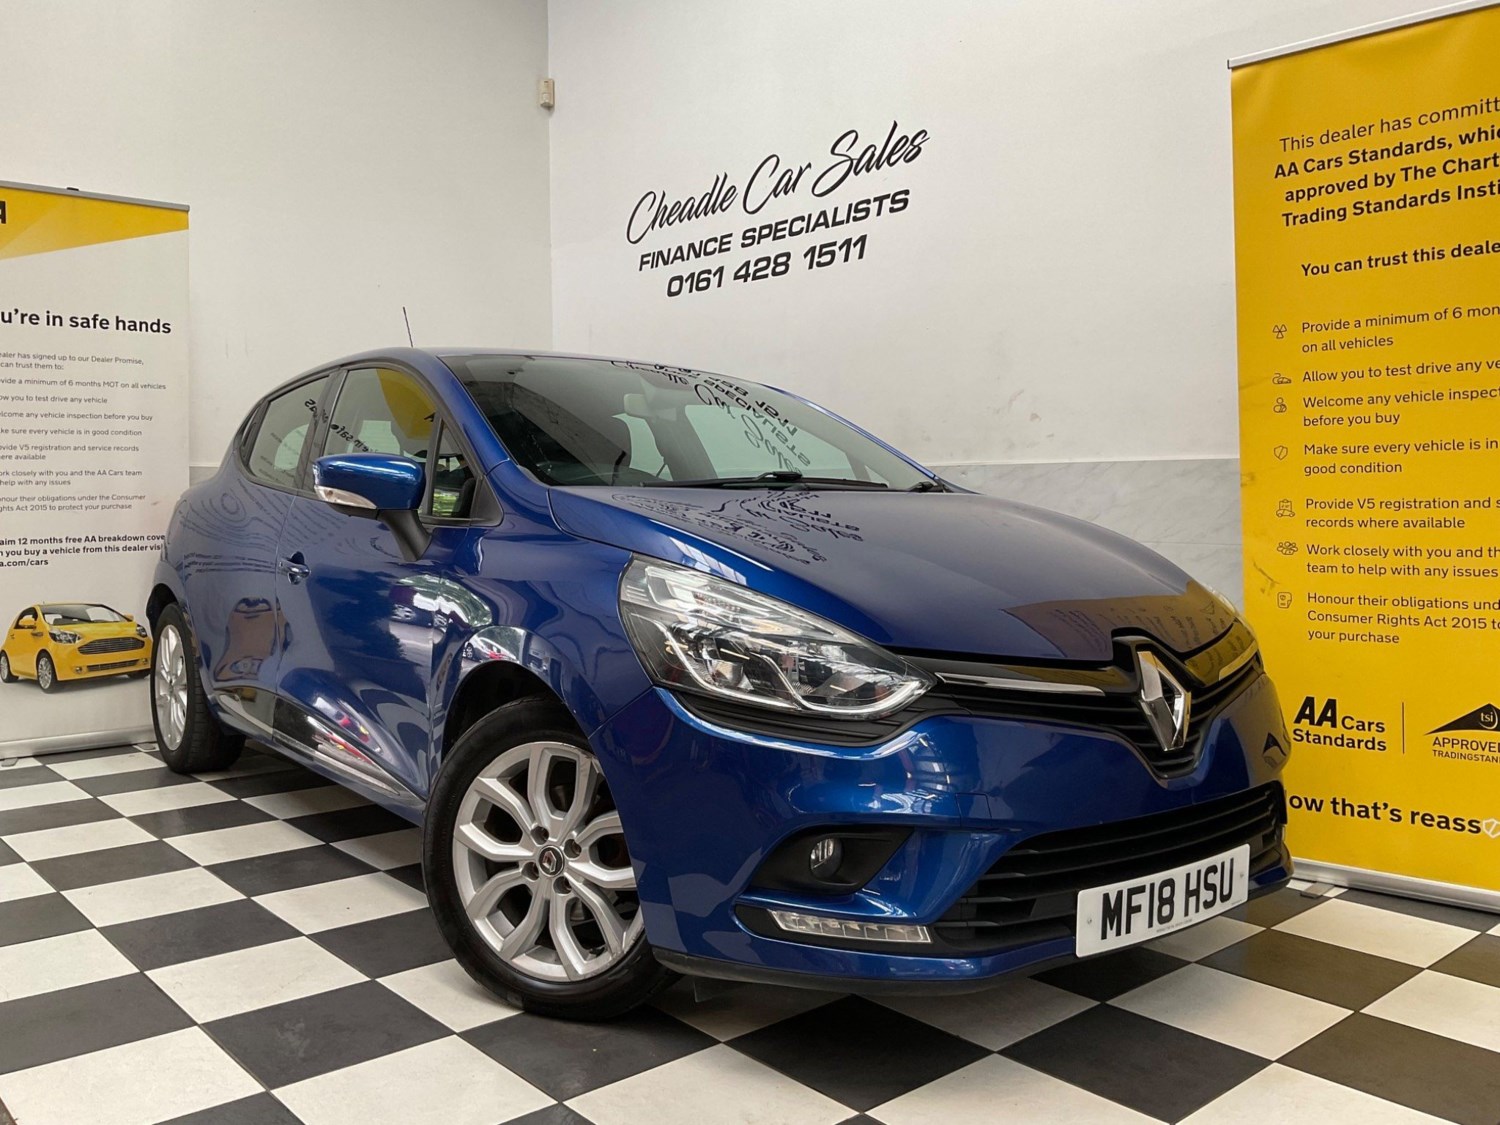 Used Renault Clio cars for sale in Stockport – Dace Motor Group